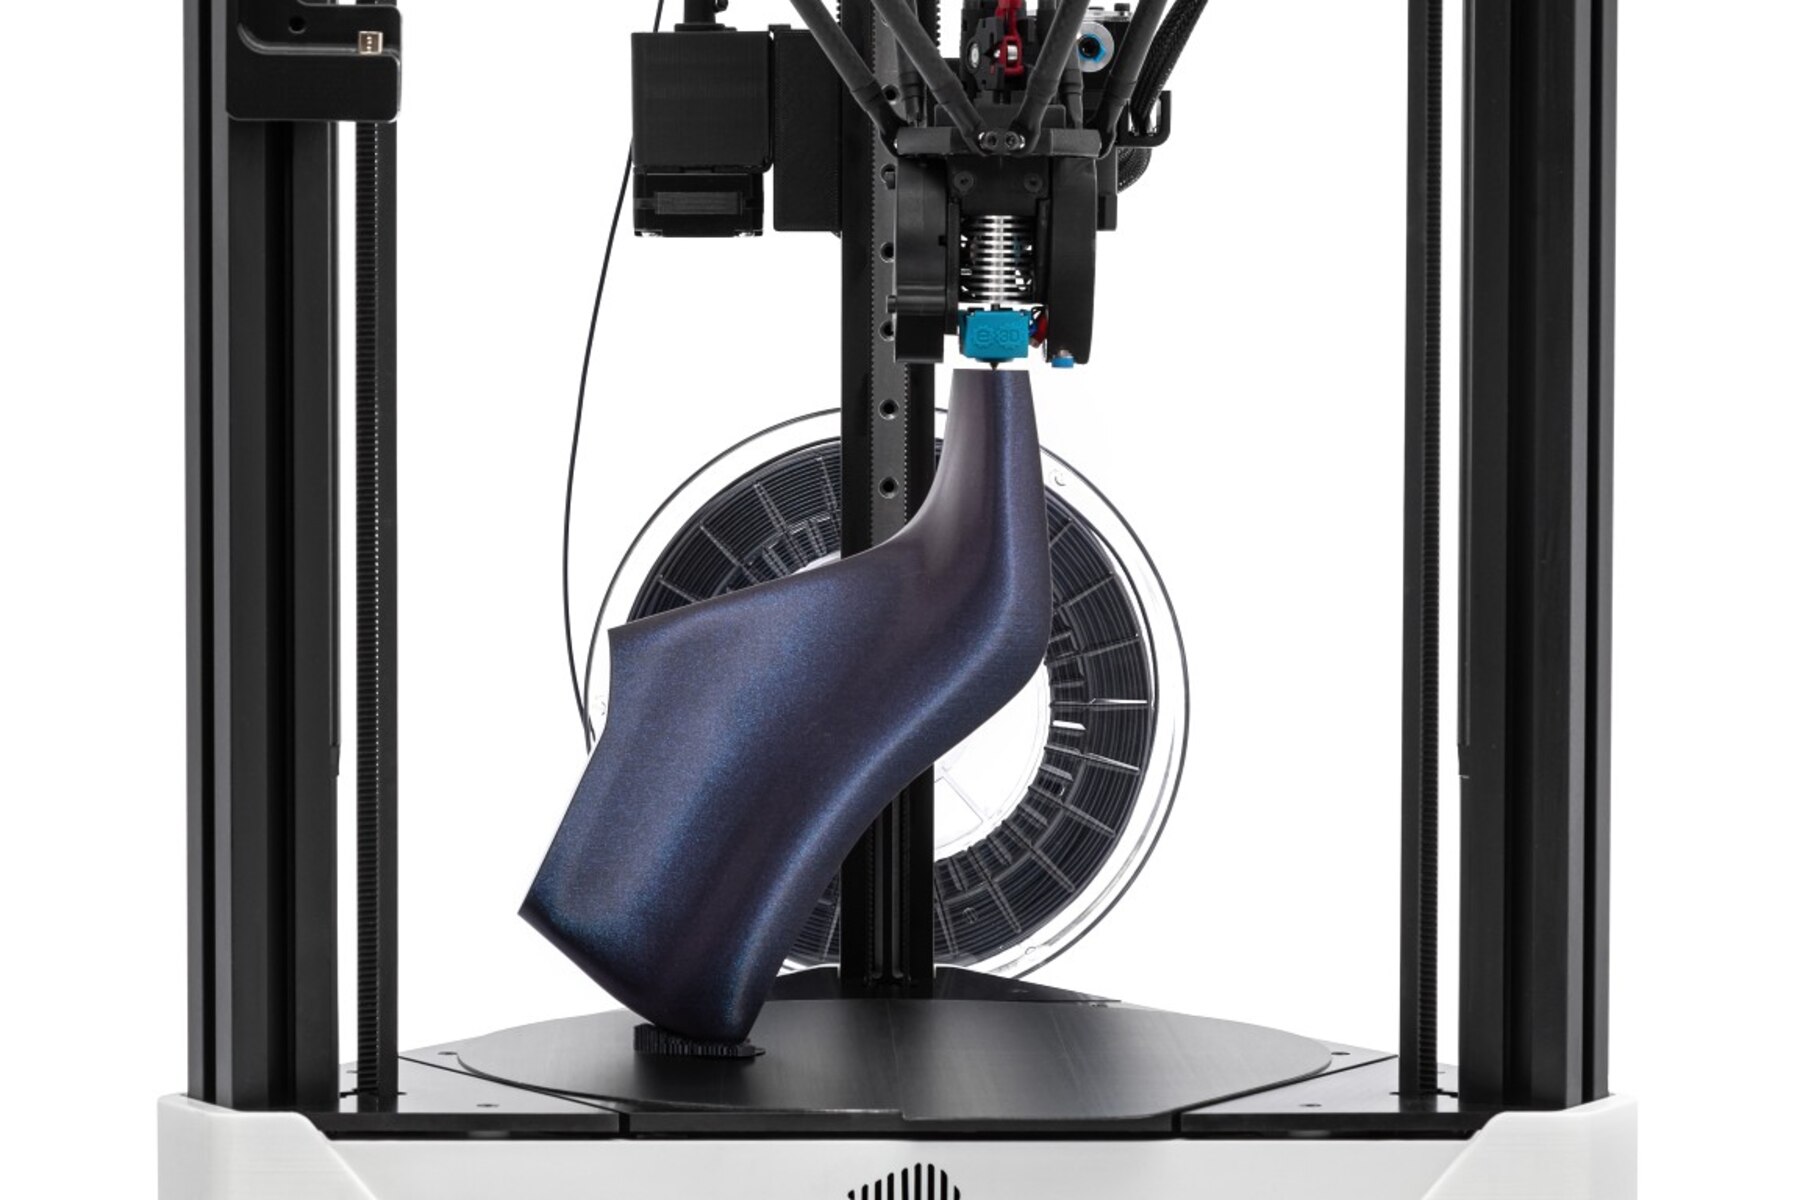 What Is Adelta 3D Printer